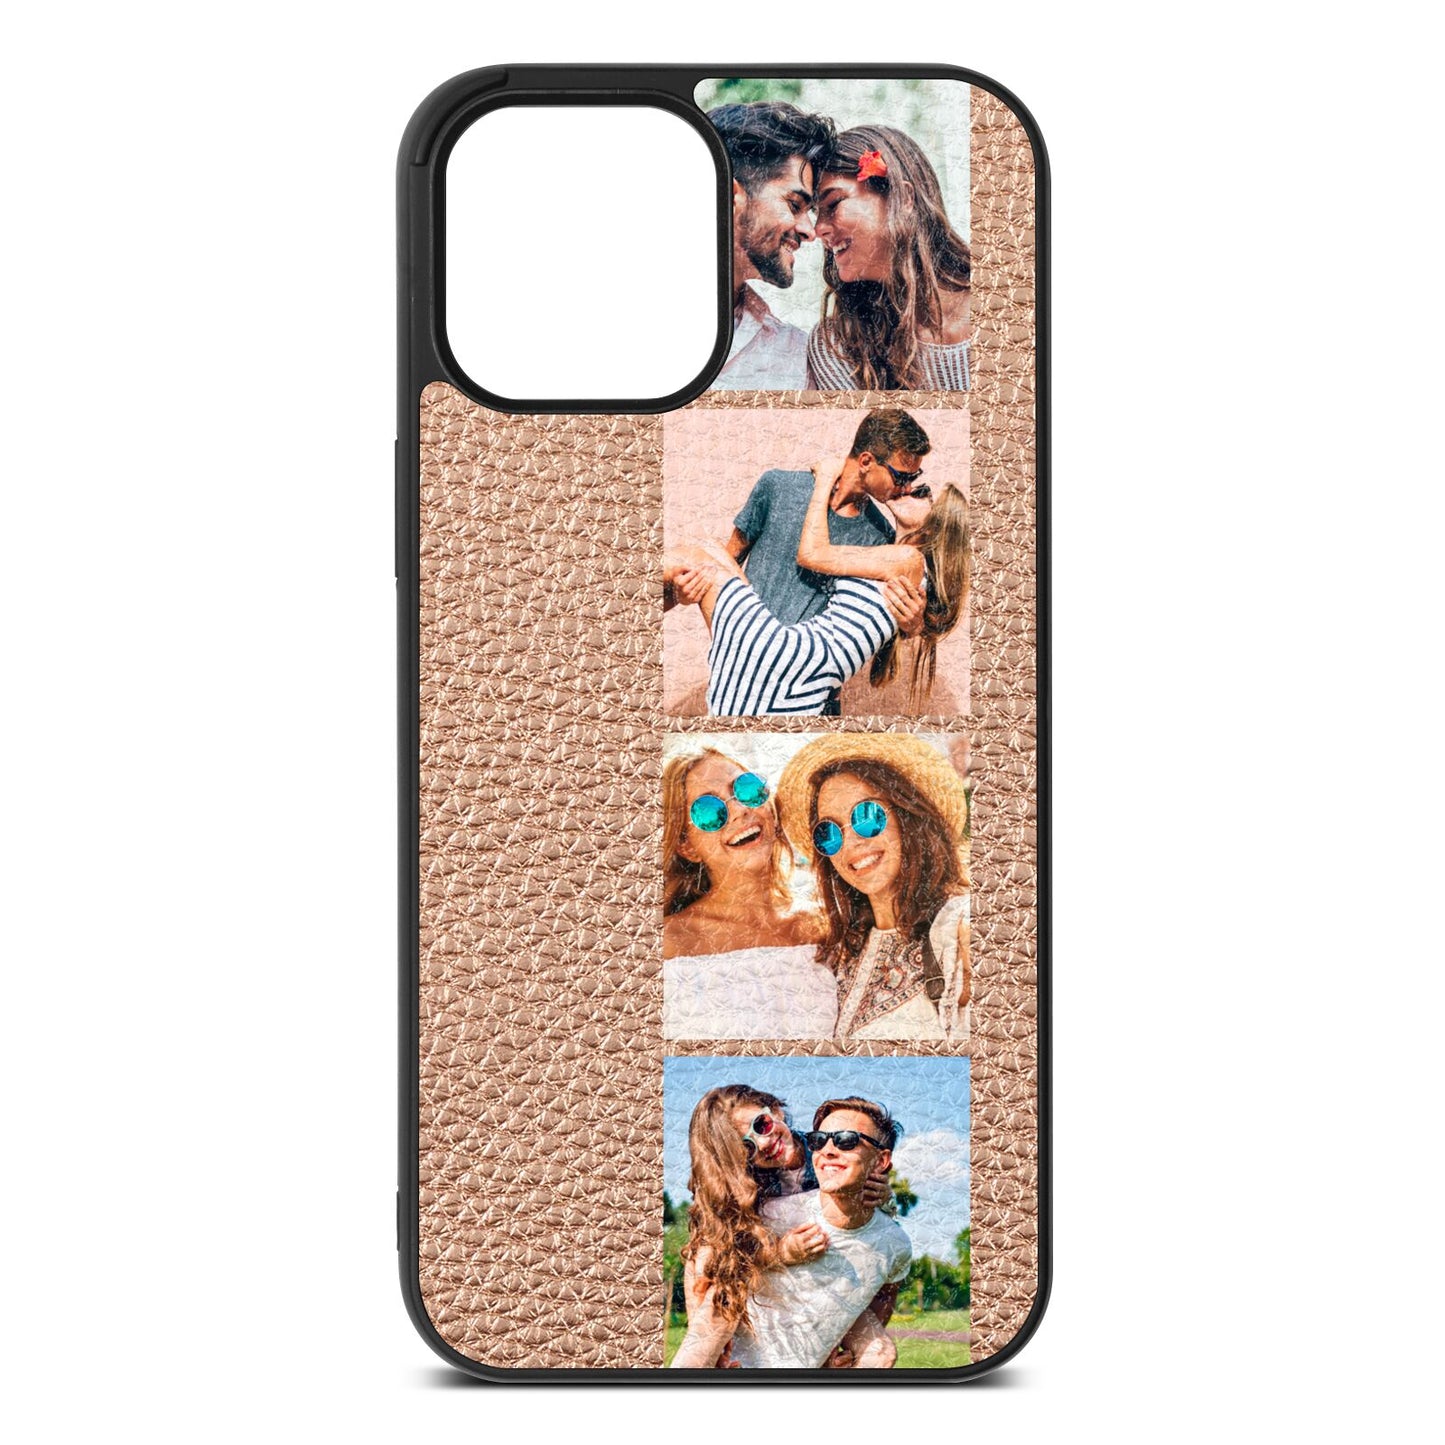 Photo Strip Montage Upload Rose Gold Pebble Leather iPhone 12 Pro Max Case